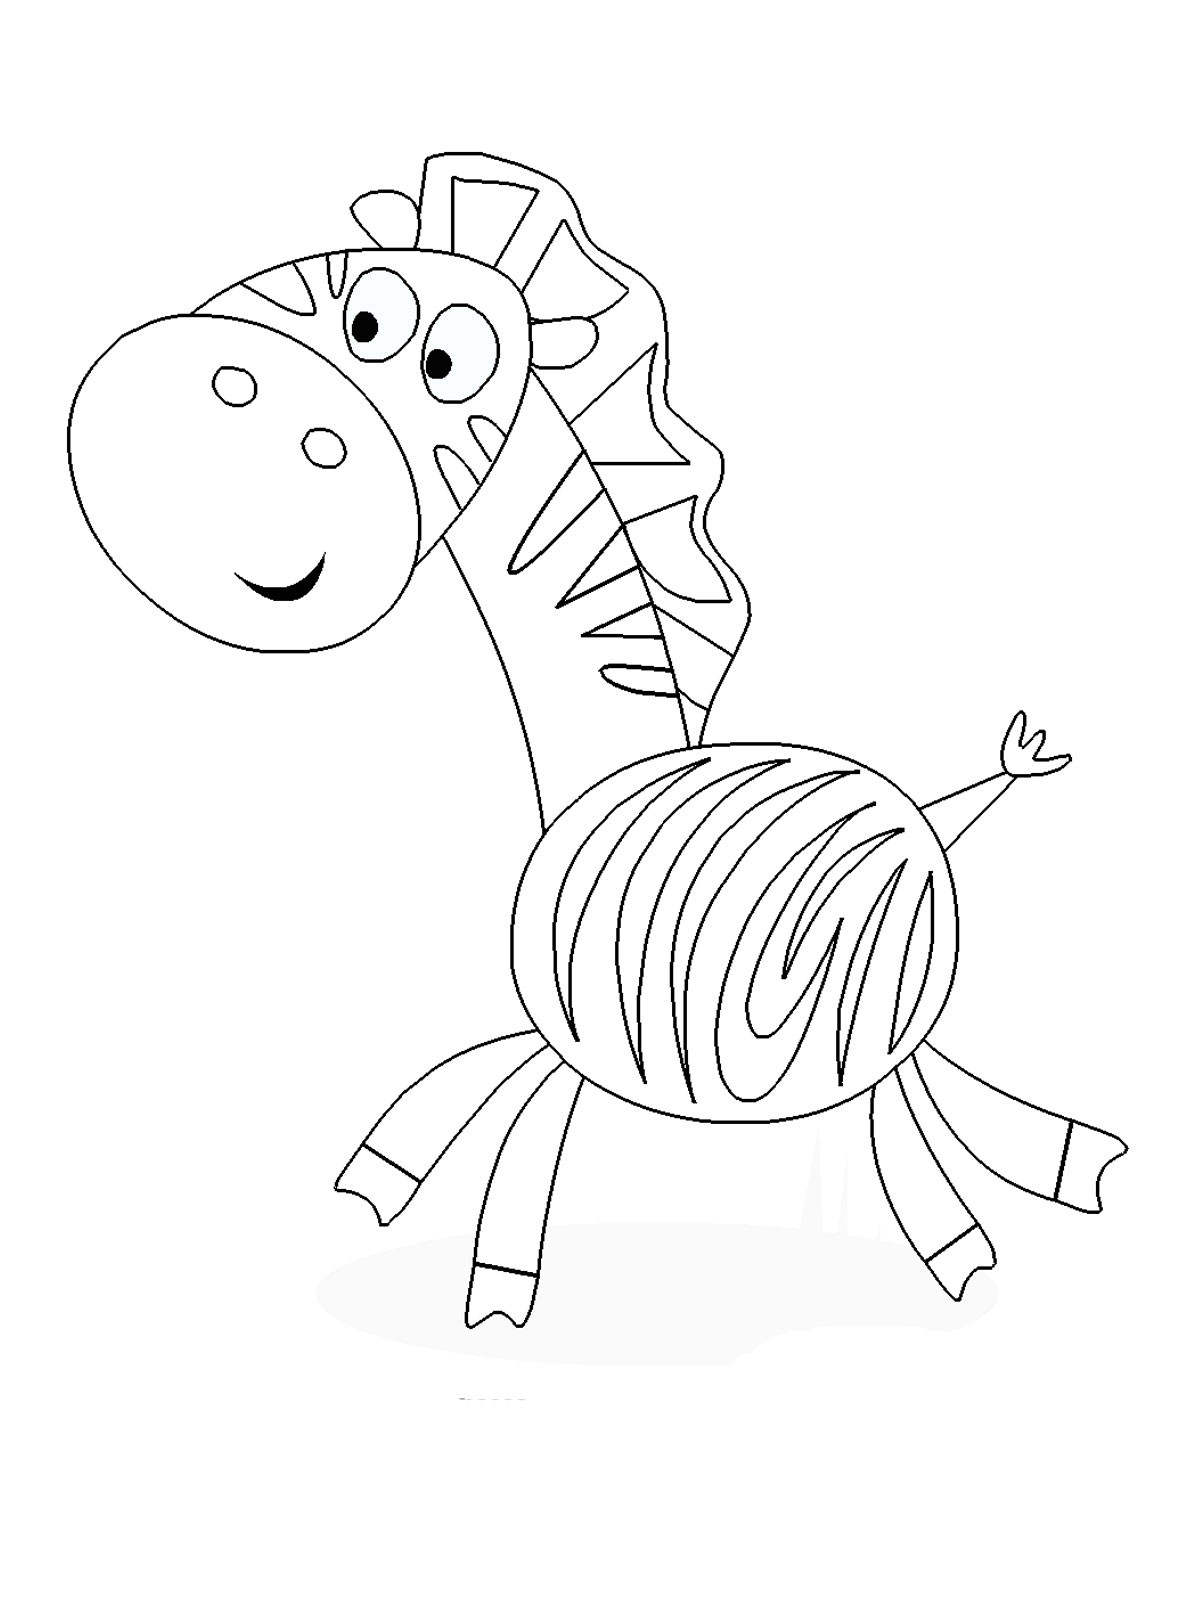 Online Coloring Pages For Toddlers
 Printable coloring pages for kids